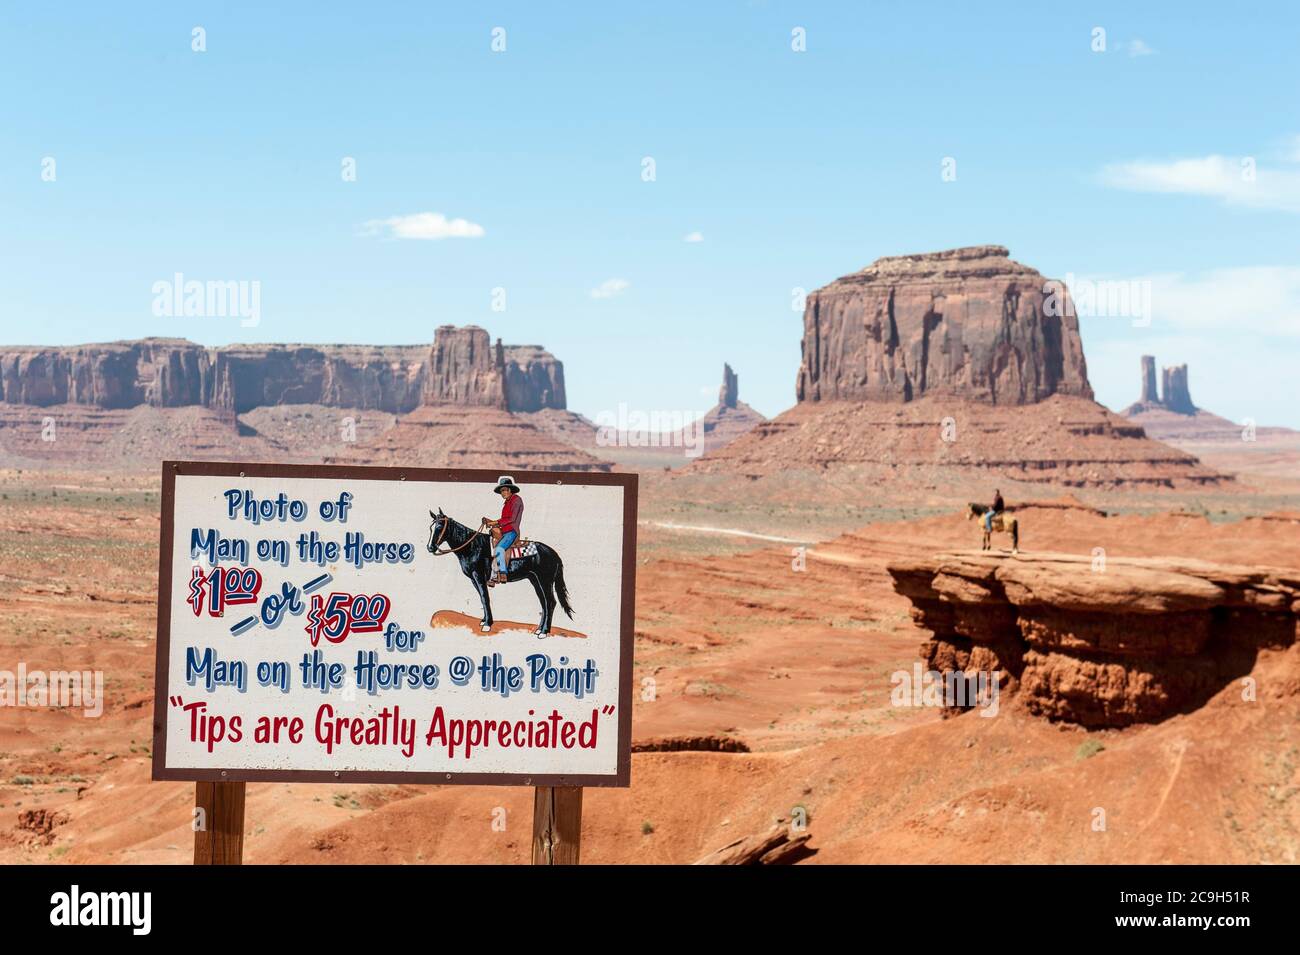 Commercialization, tourism, sign Photo of man on the horse, man on horse, geology, erosion landscape, table mountains, John Ford's Point, Monument Stock Photo